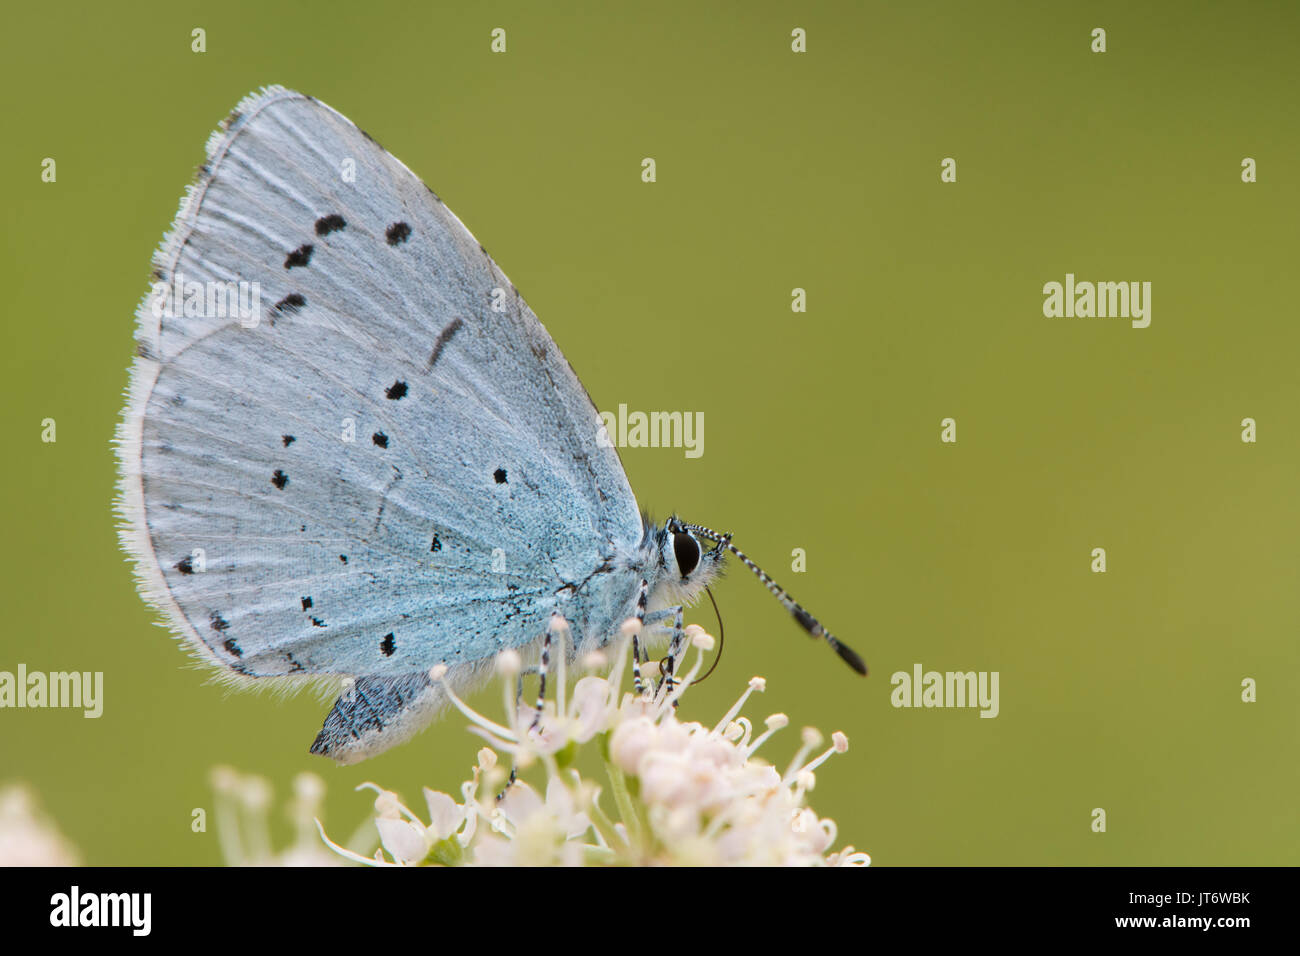 Holly blue (Celastrina argiolus) feeding on hogweed close. Female British insect in the family Lycaenidae nectaring with underside visible Stock Photo